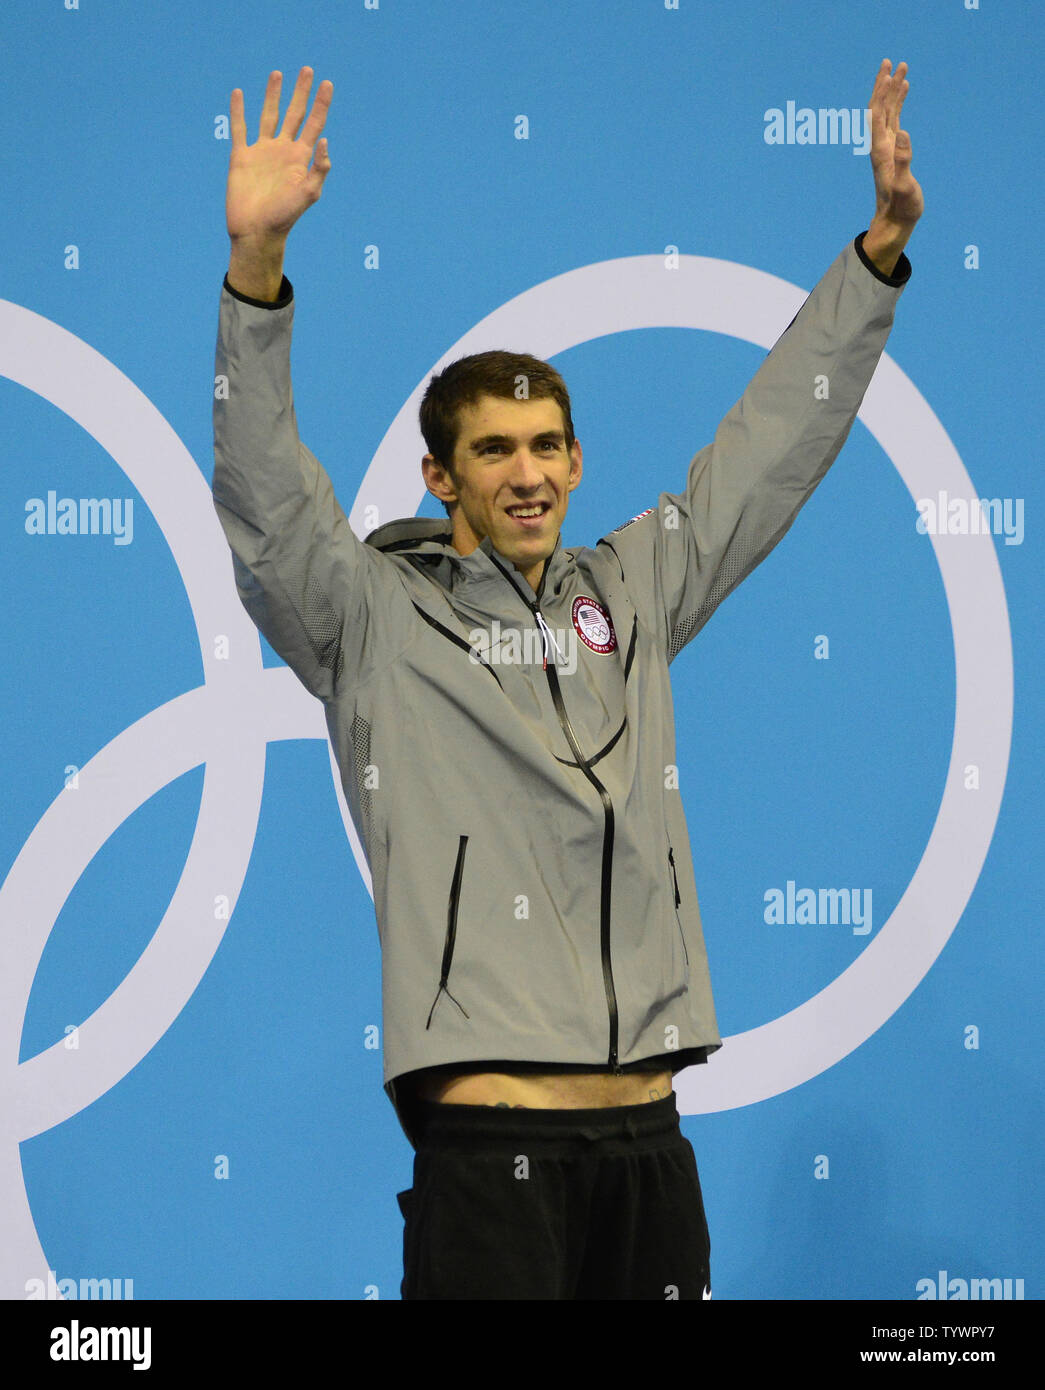 Michael Phelps of the United States acknowledges the cheers of the crowd during the medal ceremony following the Men's 200m Individual Medley Final at the London 2012 Summer Olympics on August 2, 2012 in London.  Phelps won the Gold Medal, finishing with a time of 1:54.27.  UPI/Ron Sachs Stock Photo